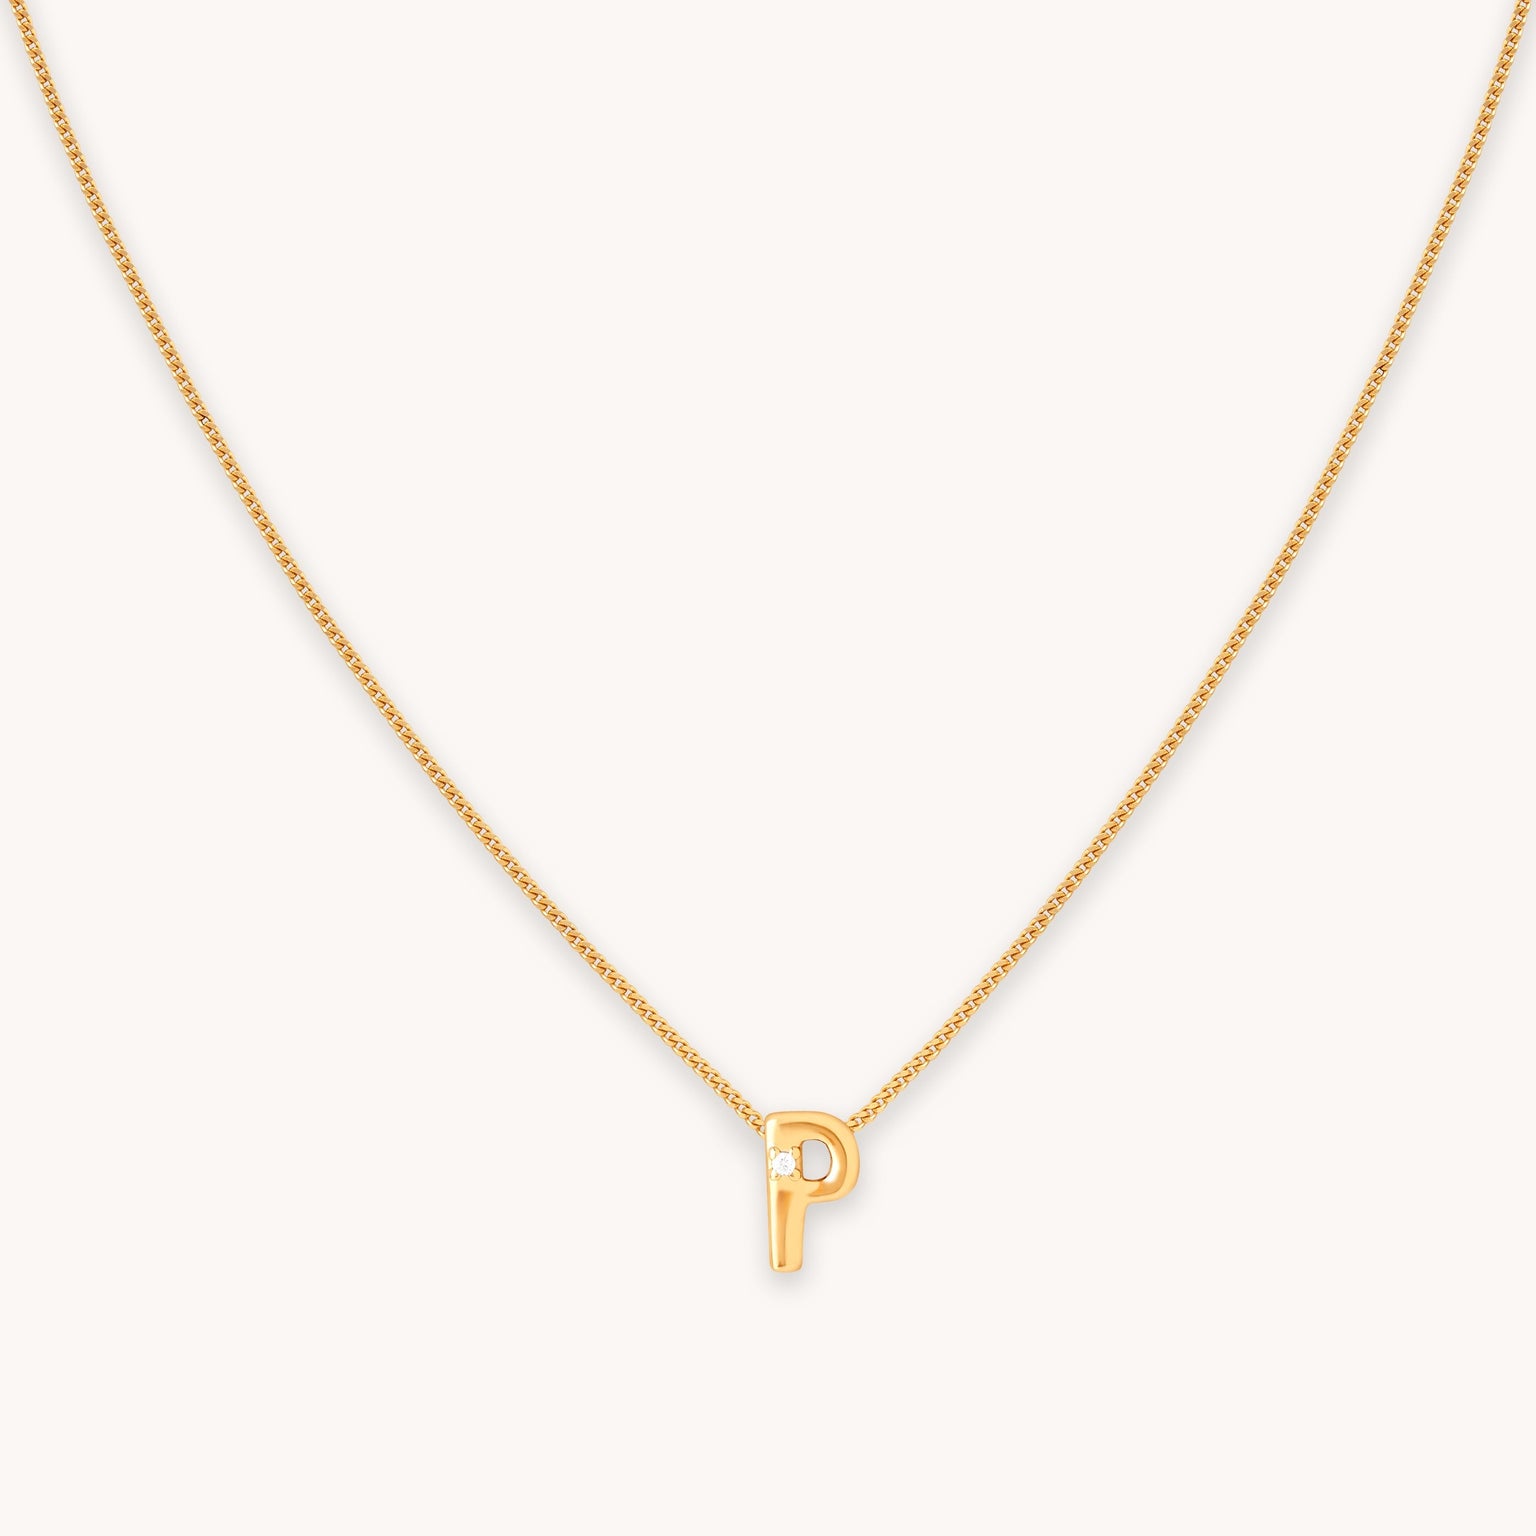 P Initial Pendant Necklace in Gold